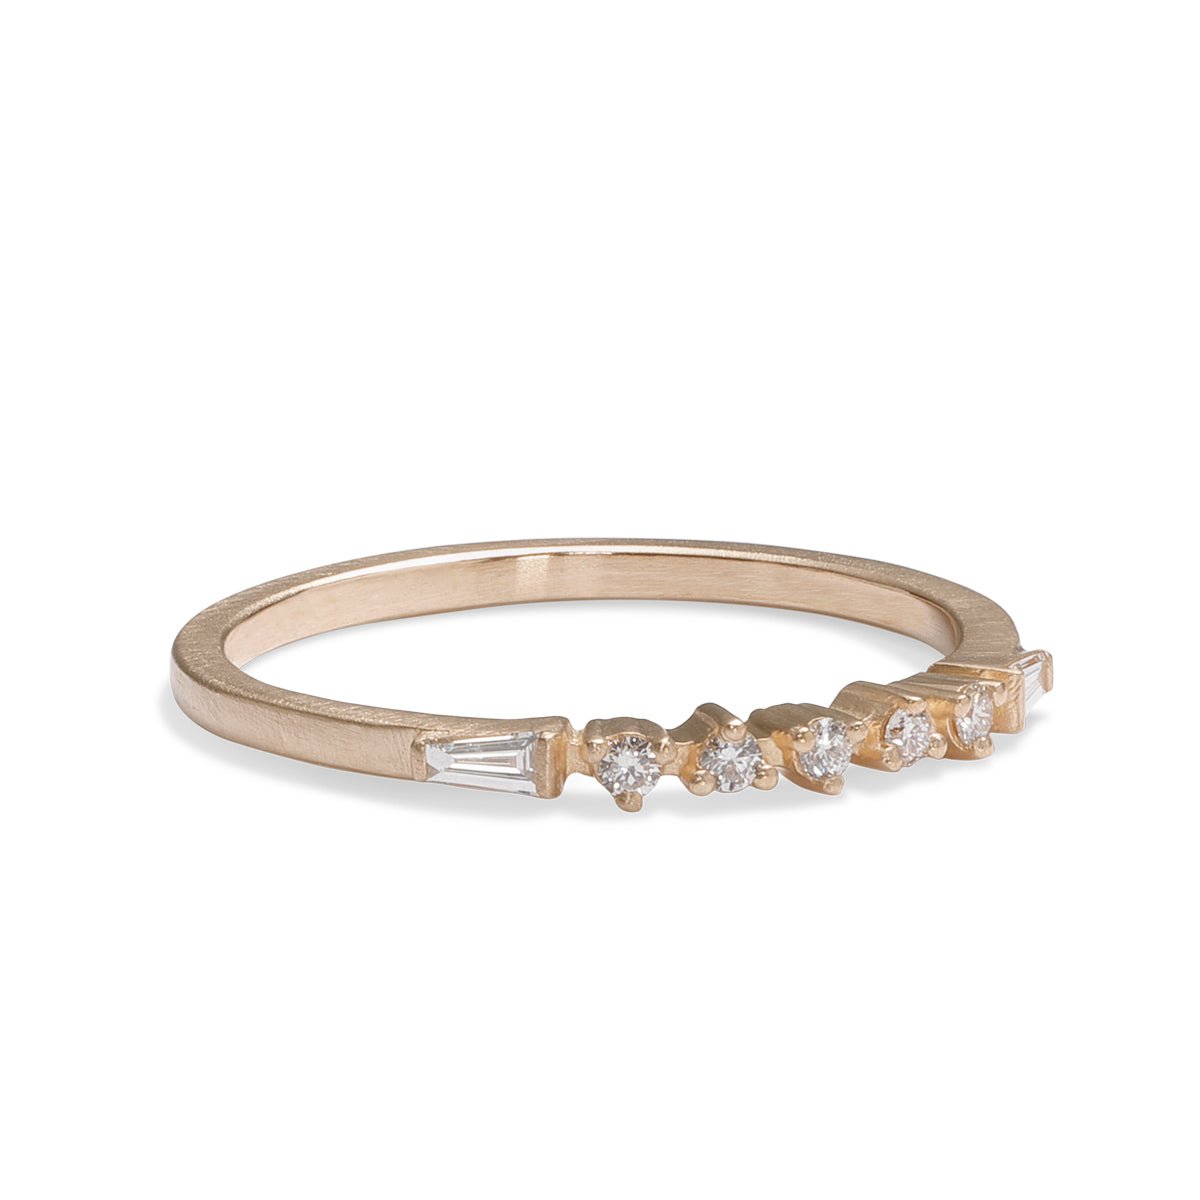 Alma 14K recycled gold stacking ring, with lab-grown diamonds. Designed and handcrafted in Portland, Oregon.